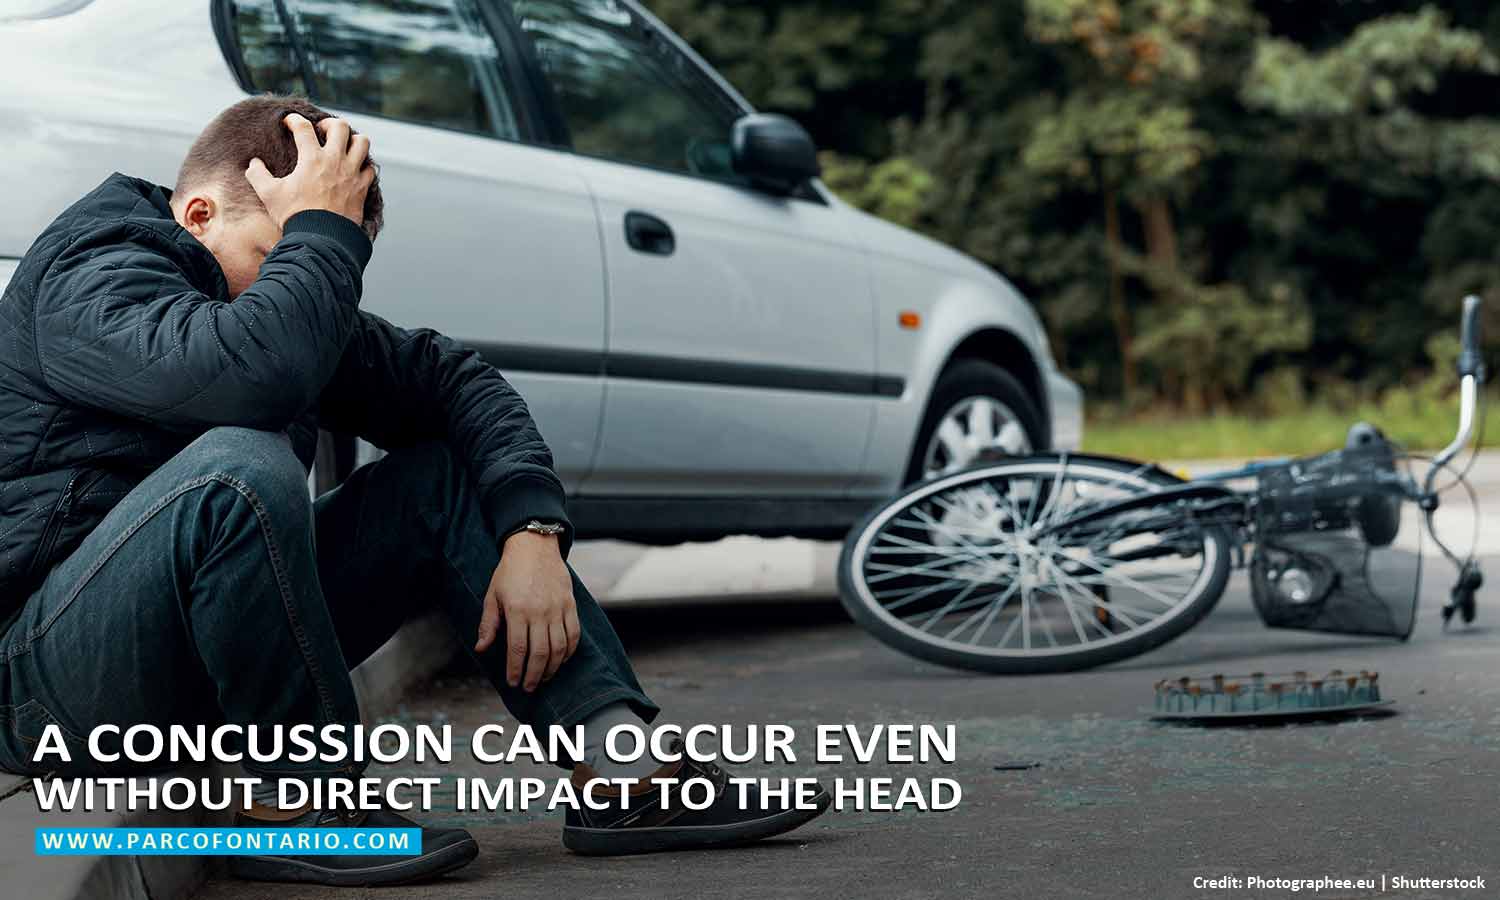 A concussion can occur even without direct impact